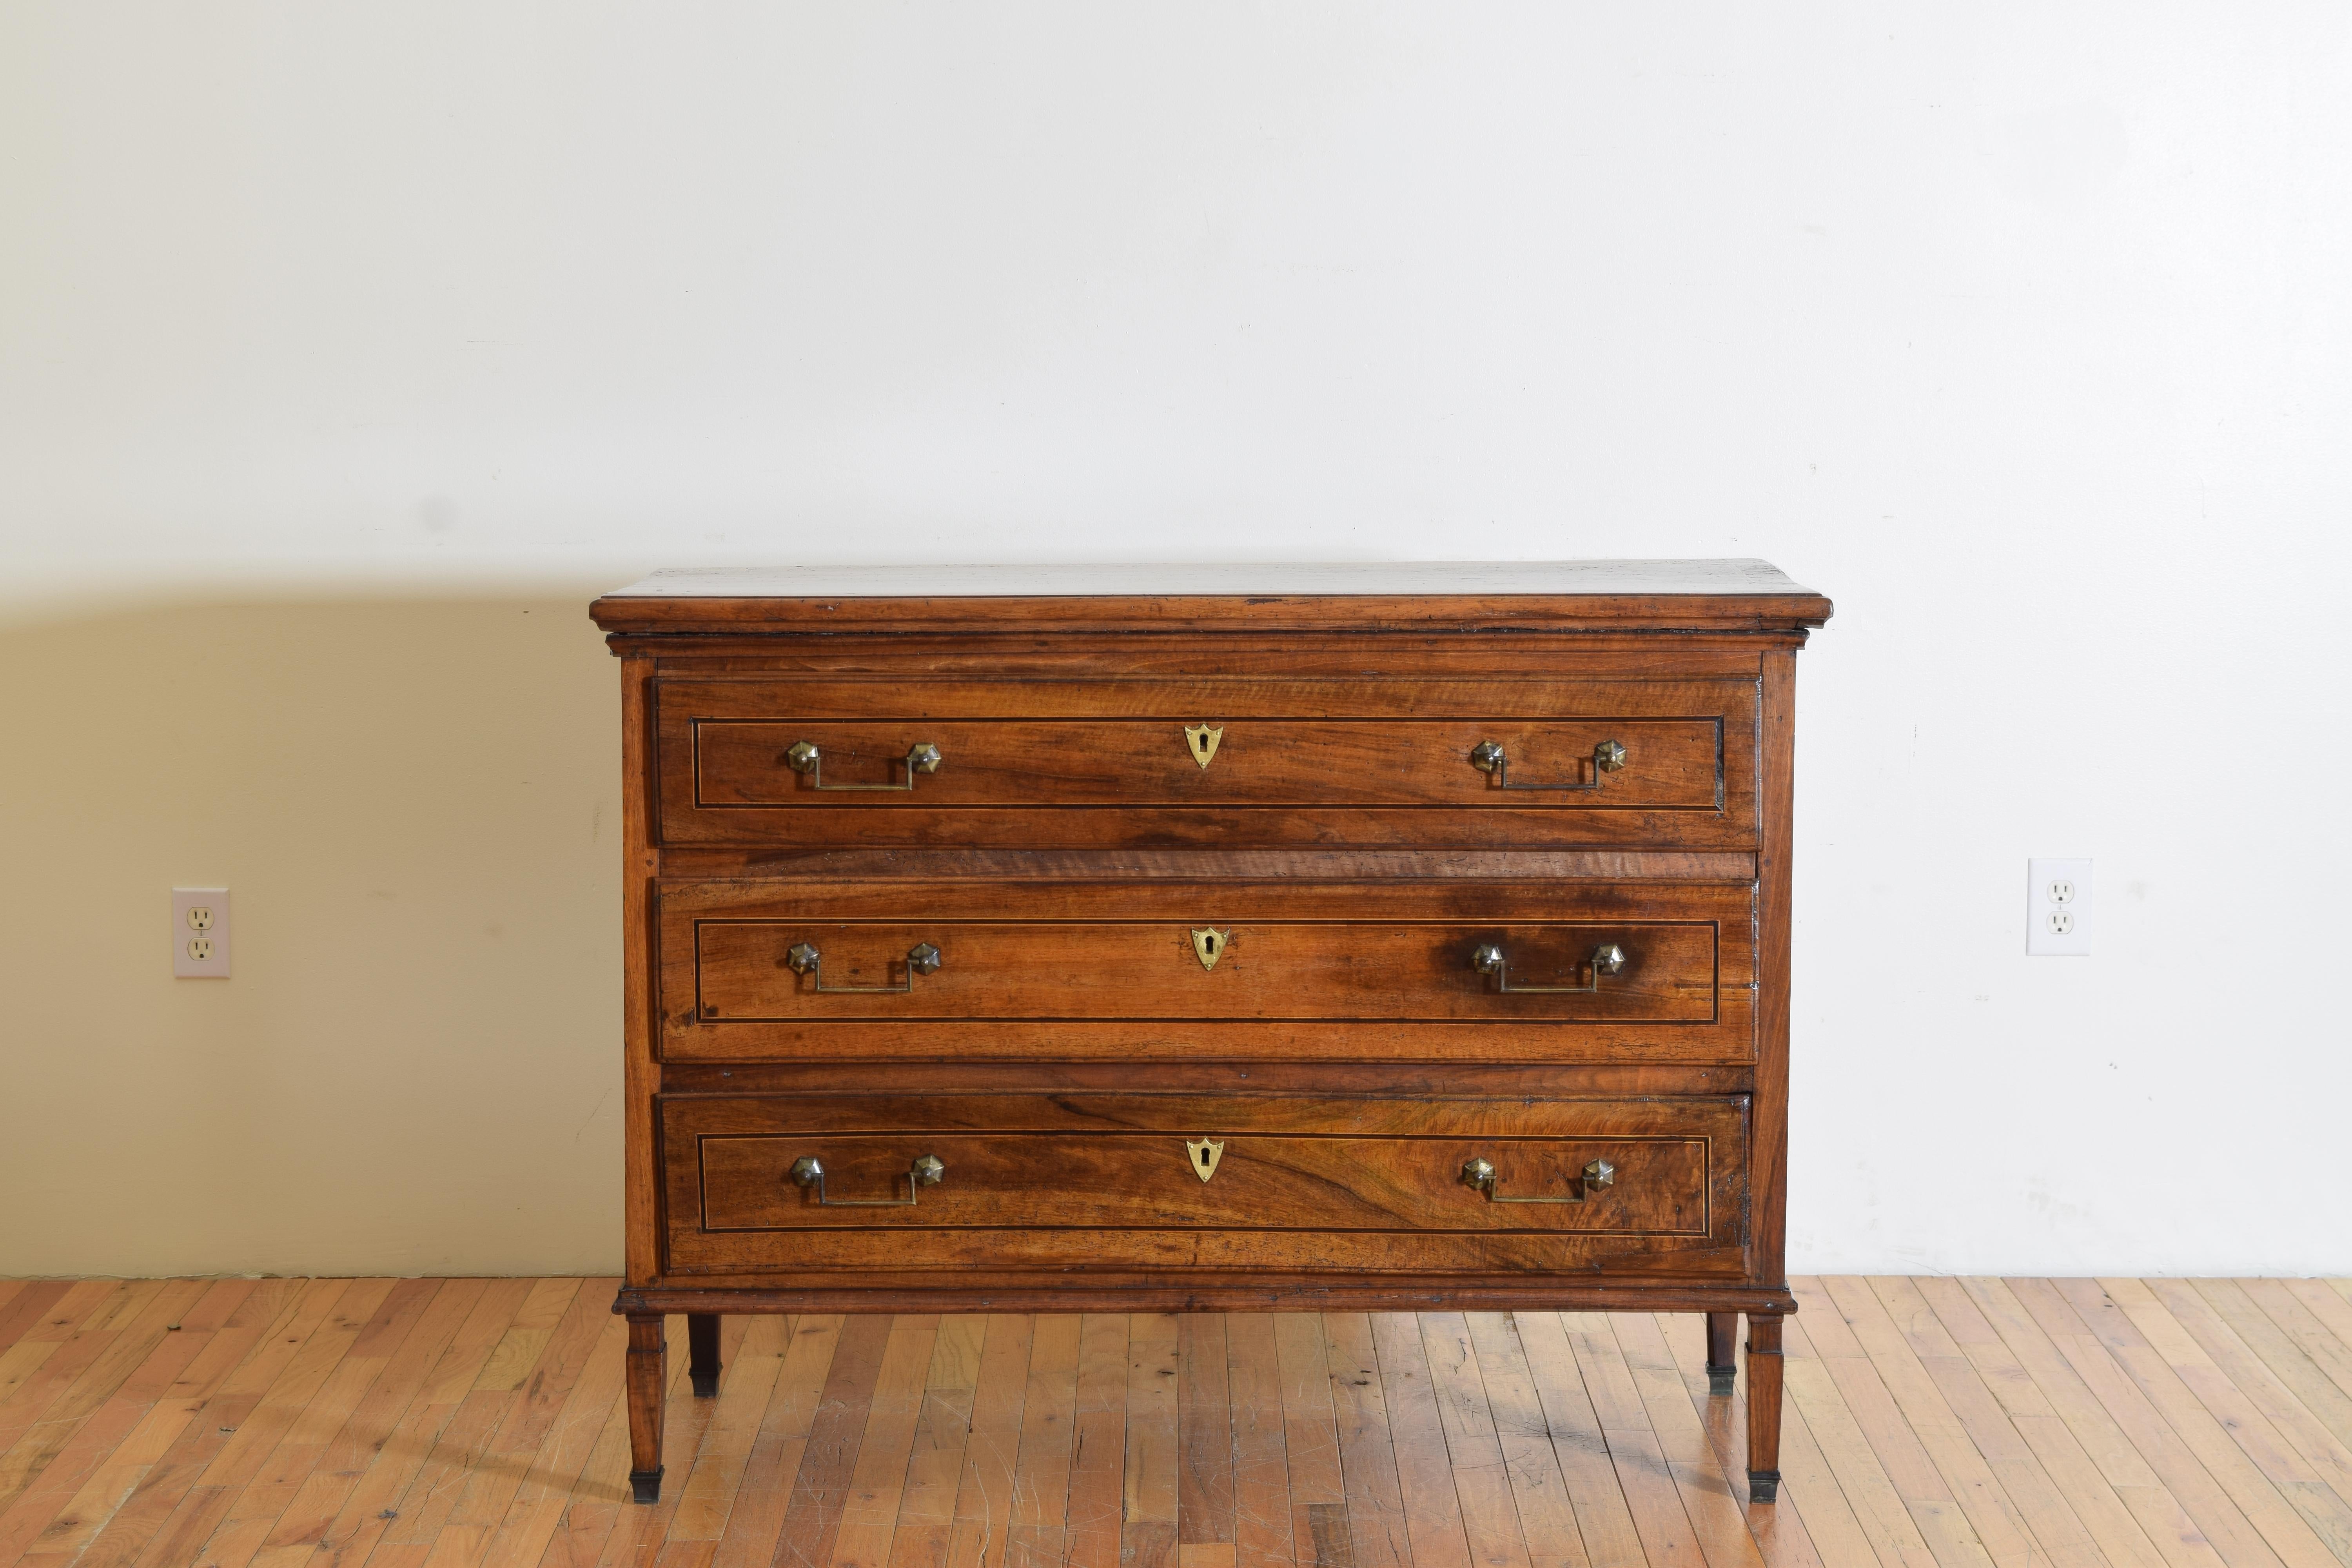 Having a rectangular top with molded edge atop a conforming case housing 3 drawers each with ebonized banding and brass handles and escutcheons, the sides with raised rectangular paneling, raised on interesting slender and deeper than wider feet